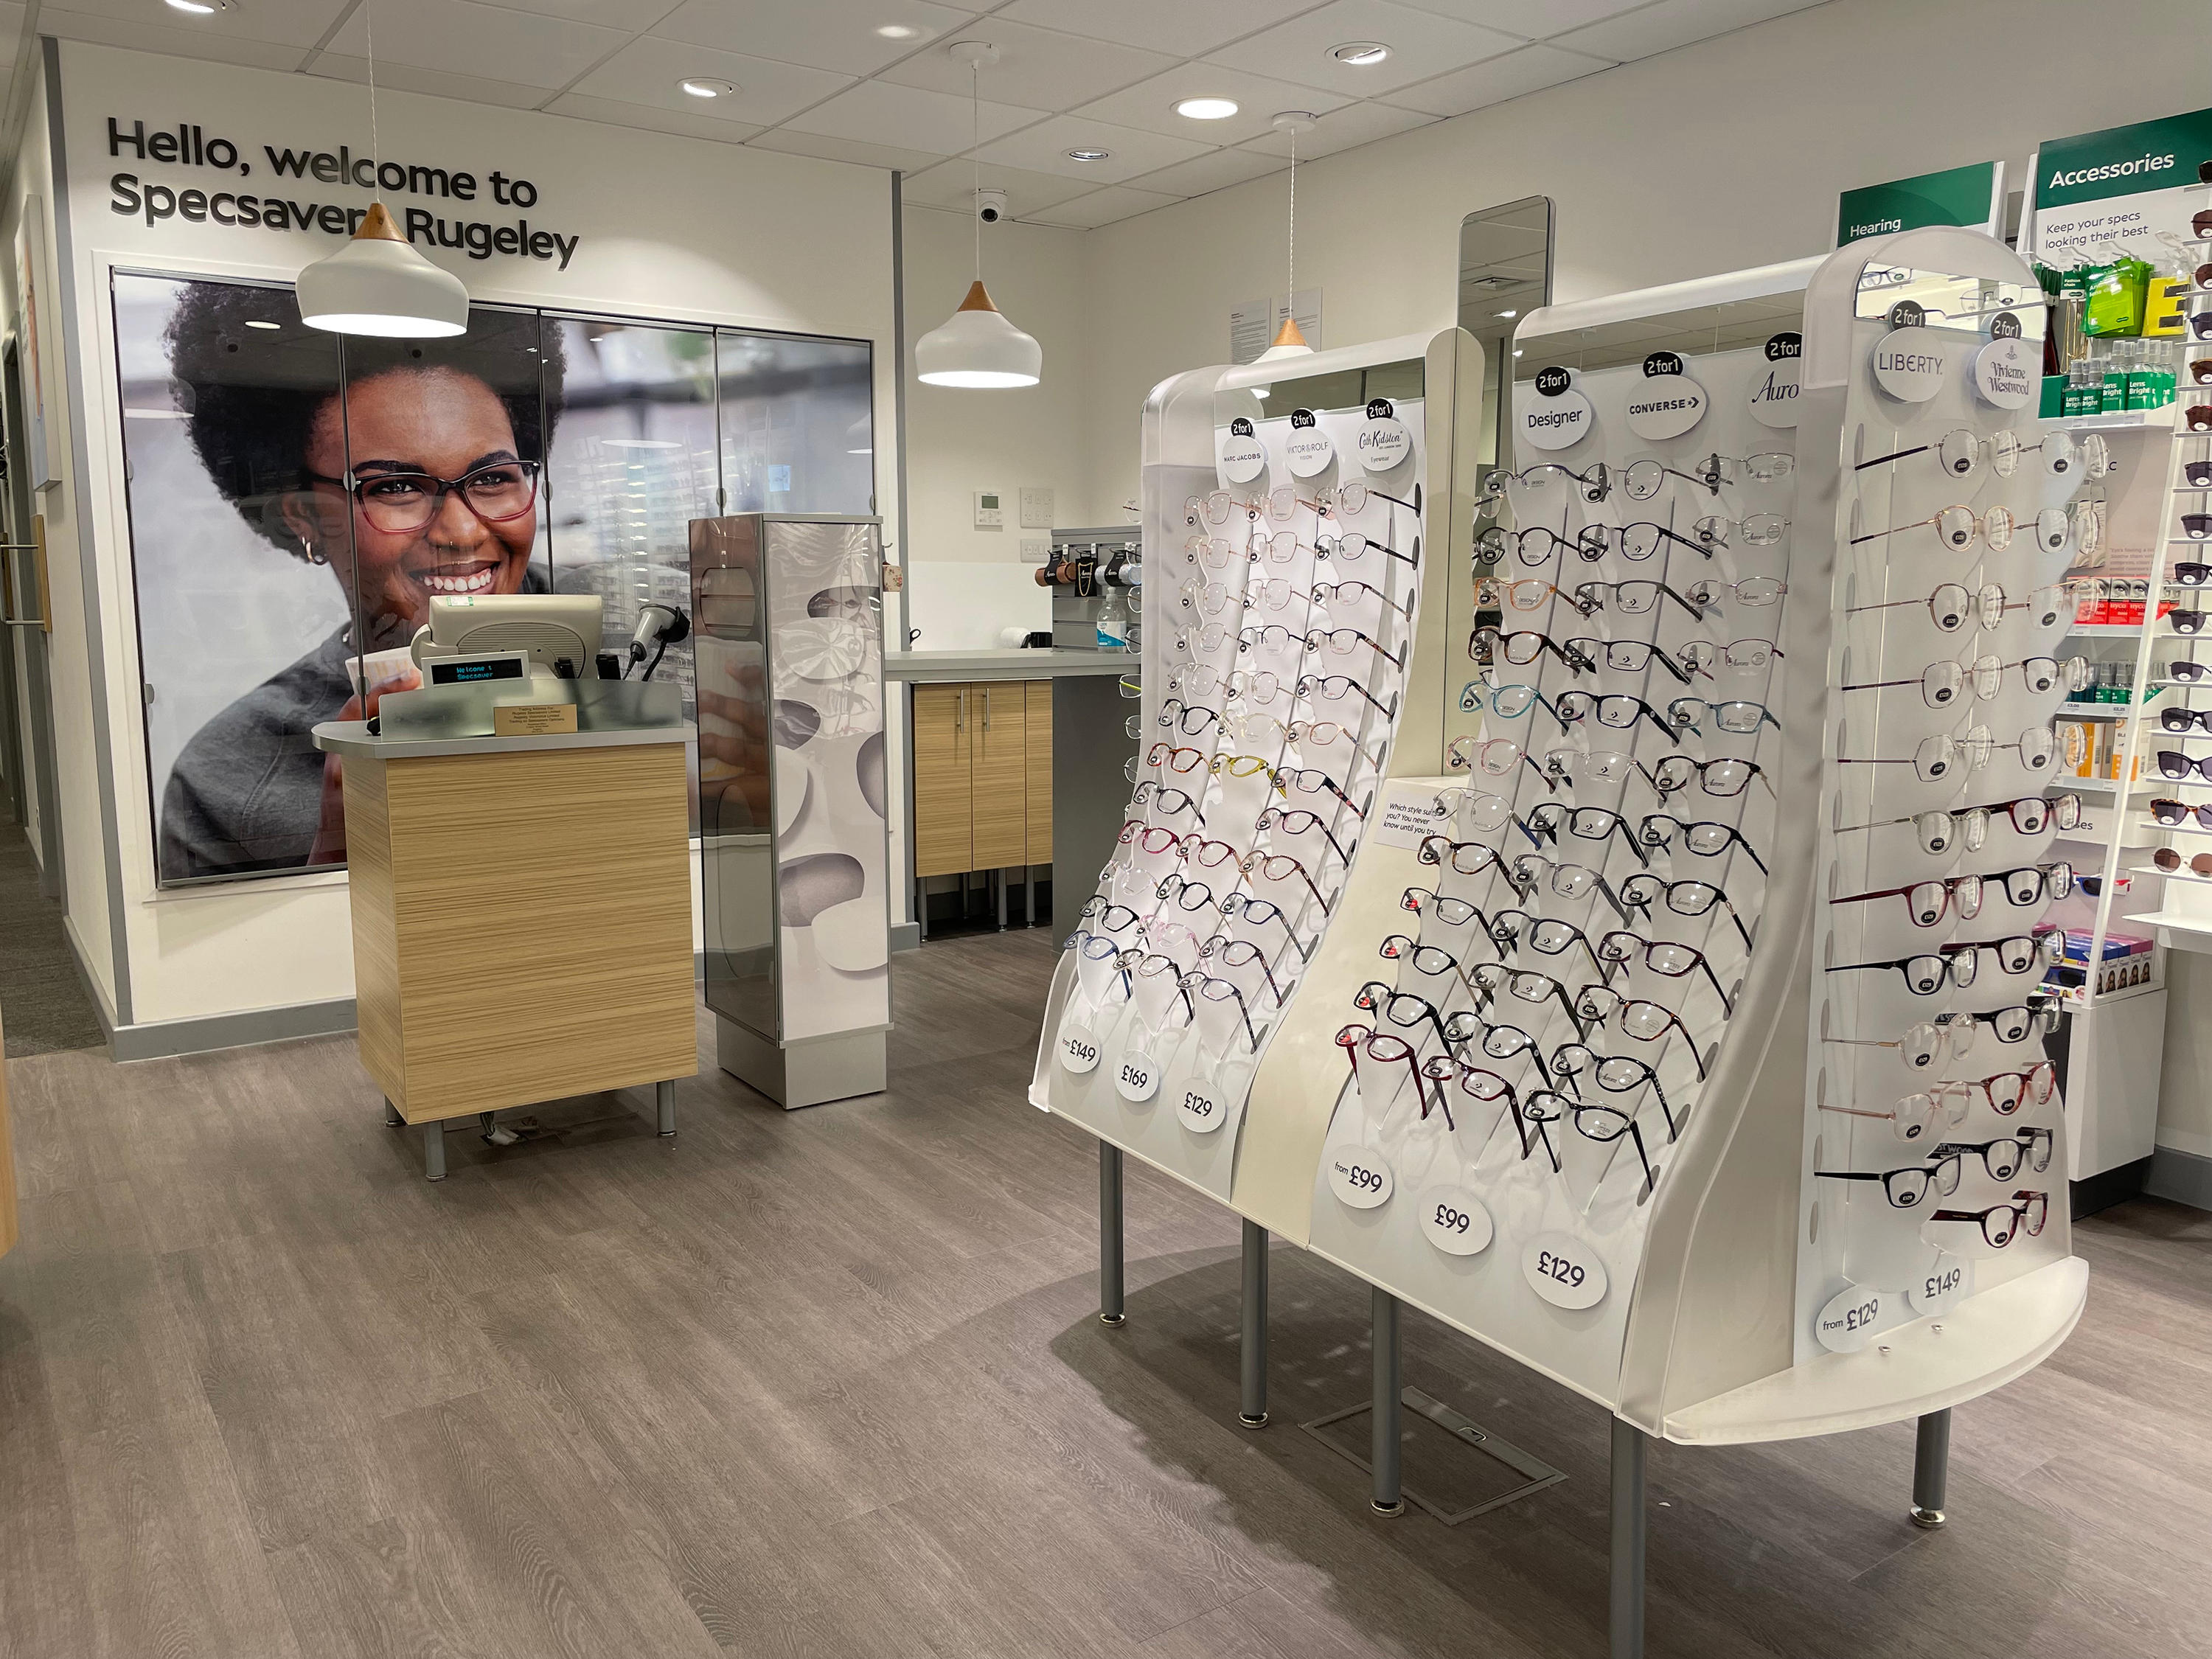 Specsavers Rugeley Specsavers Opticians and Audiologists - Rugeley Rugeley 01889 576060